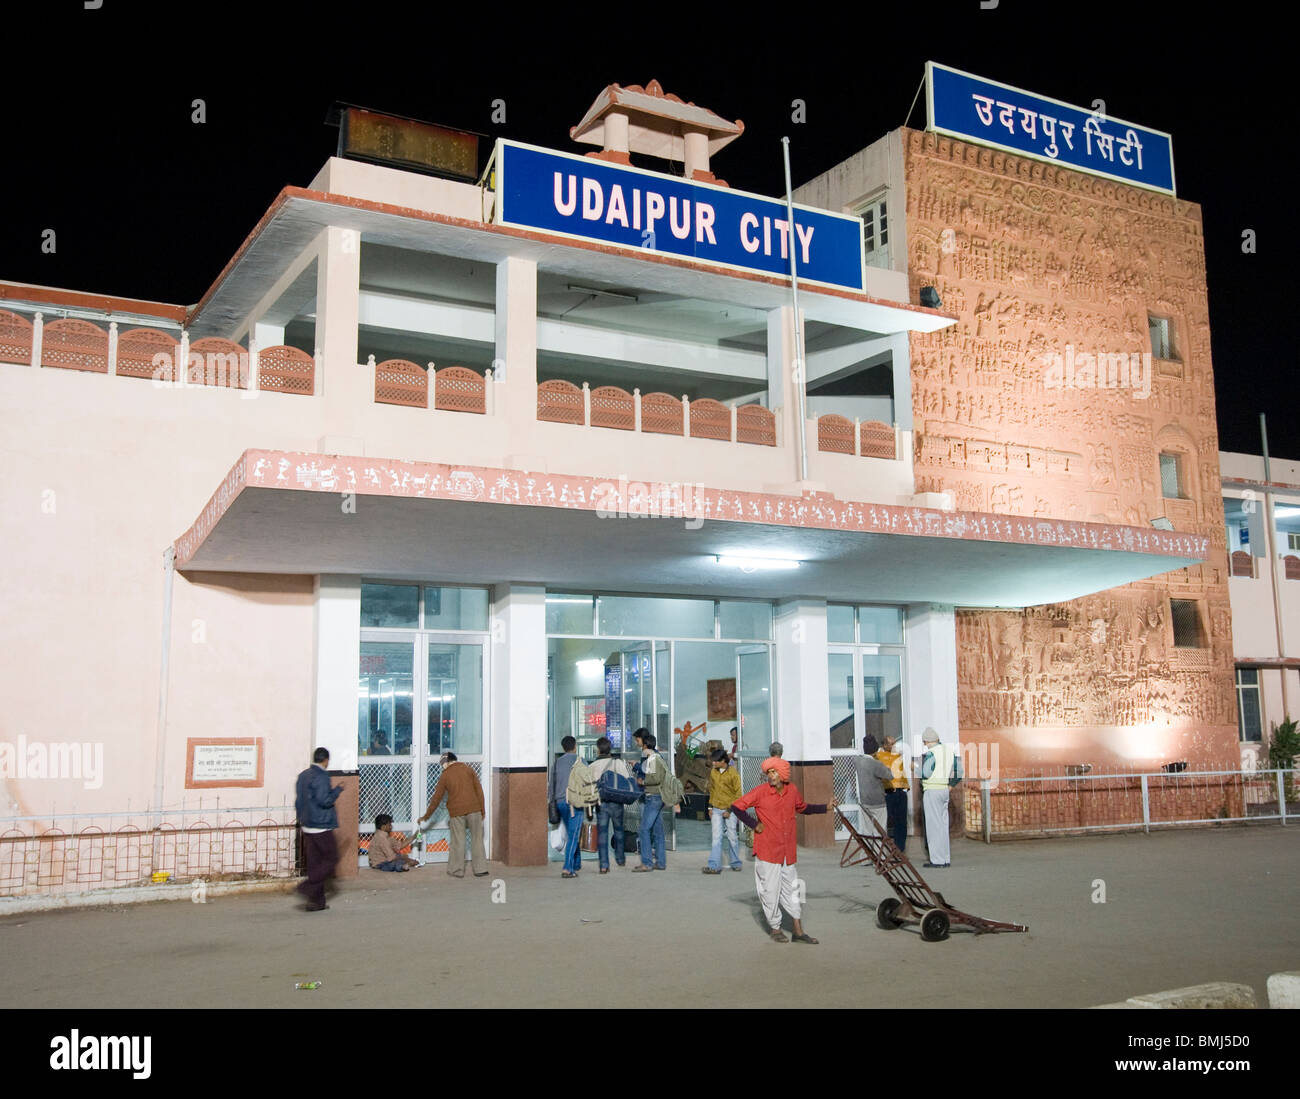 Udaipur City Station in Indien Stockfoto